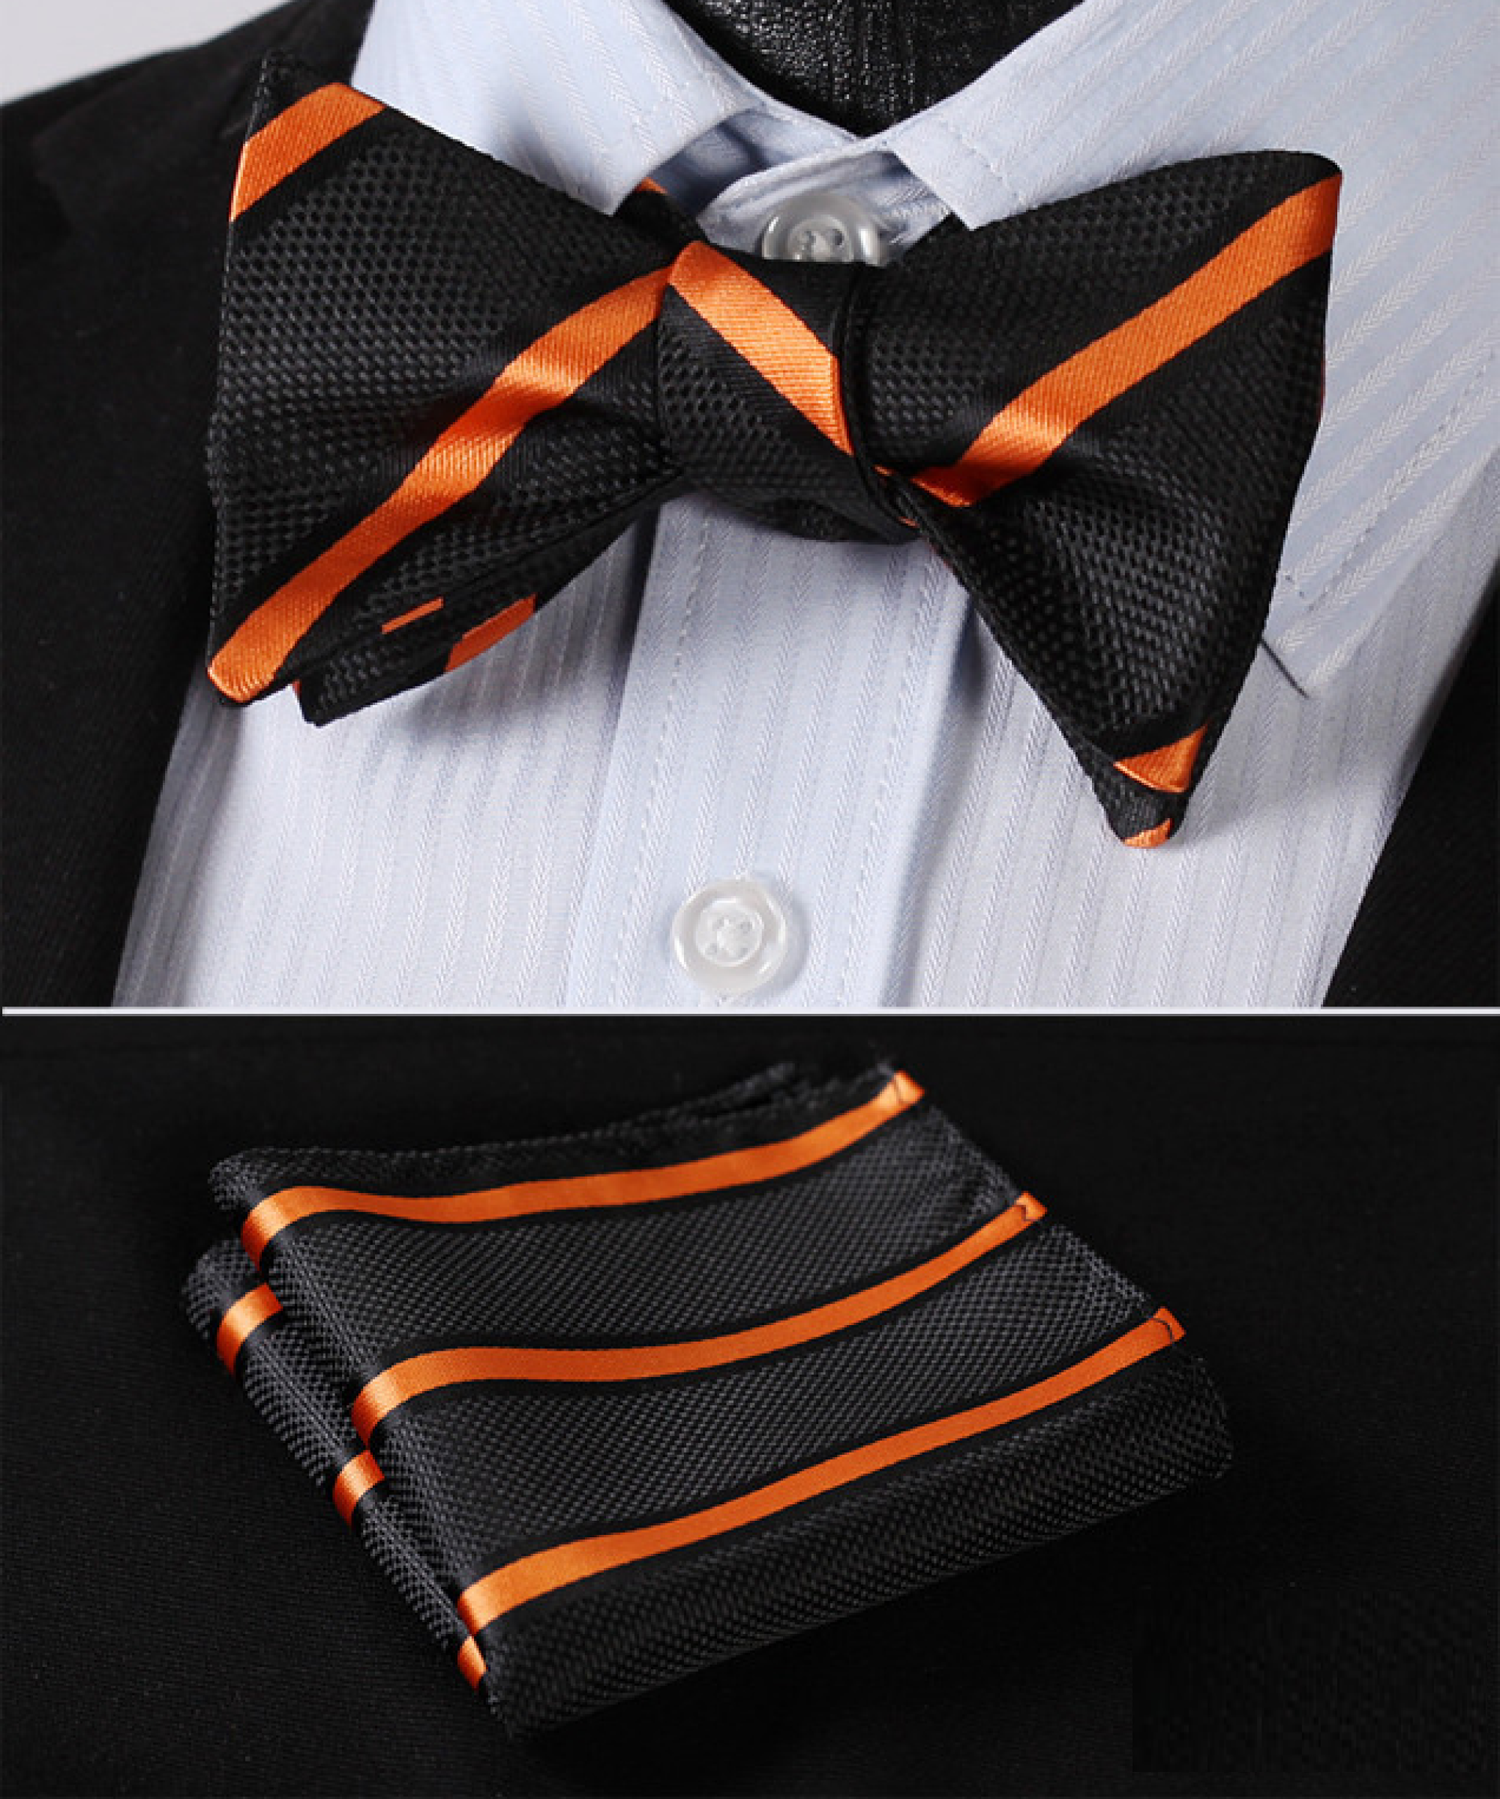 Suit View: Black, Orange Stripe Bow Tie and Matching Pocket Square